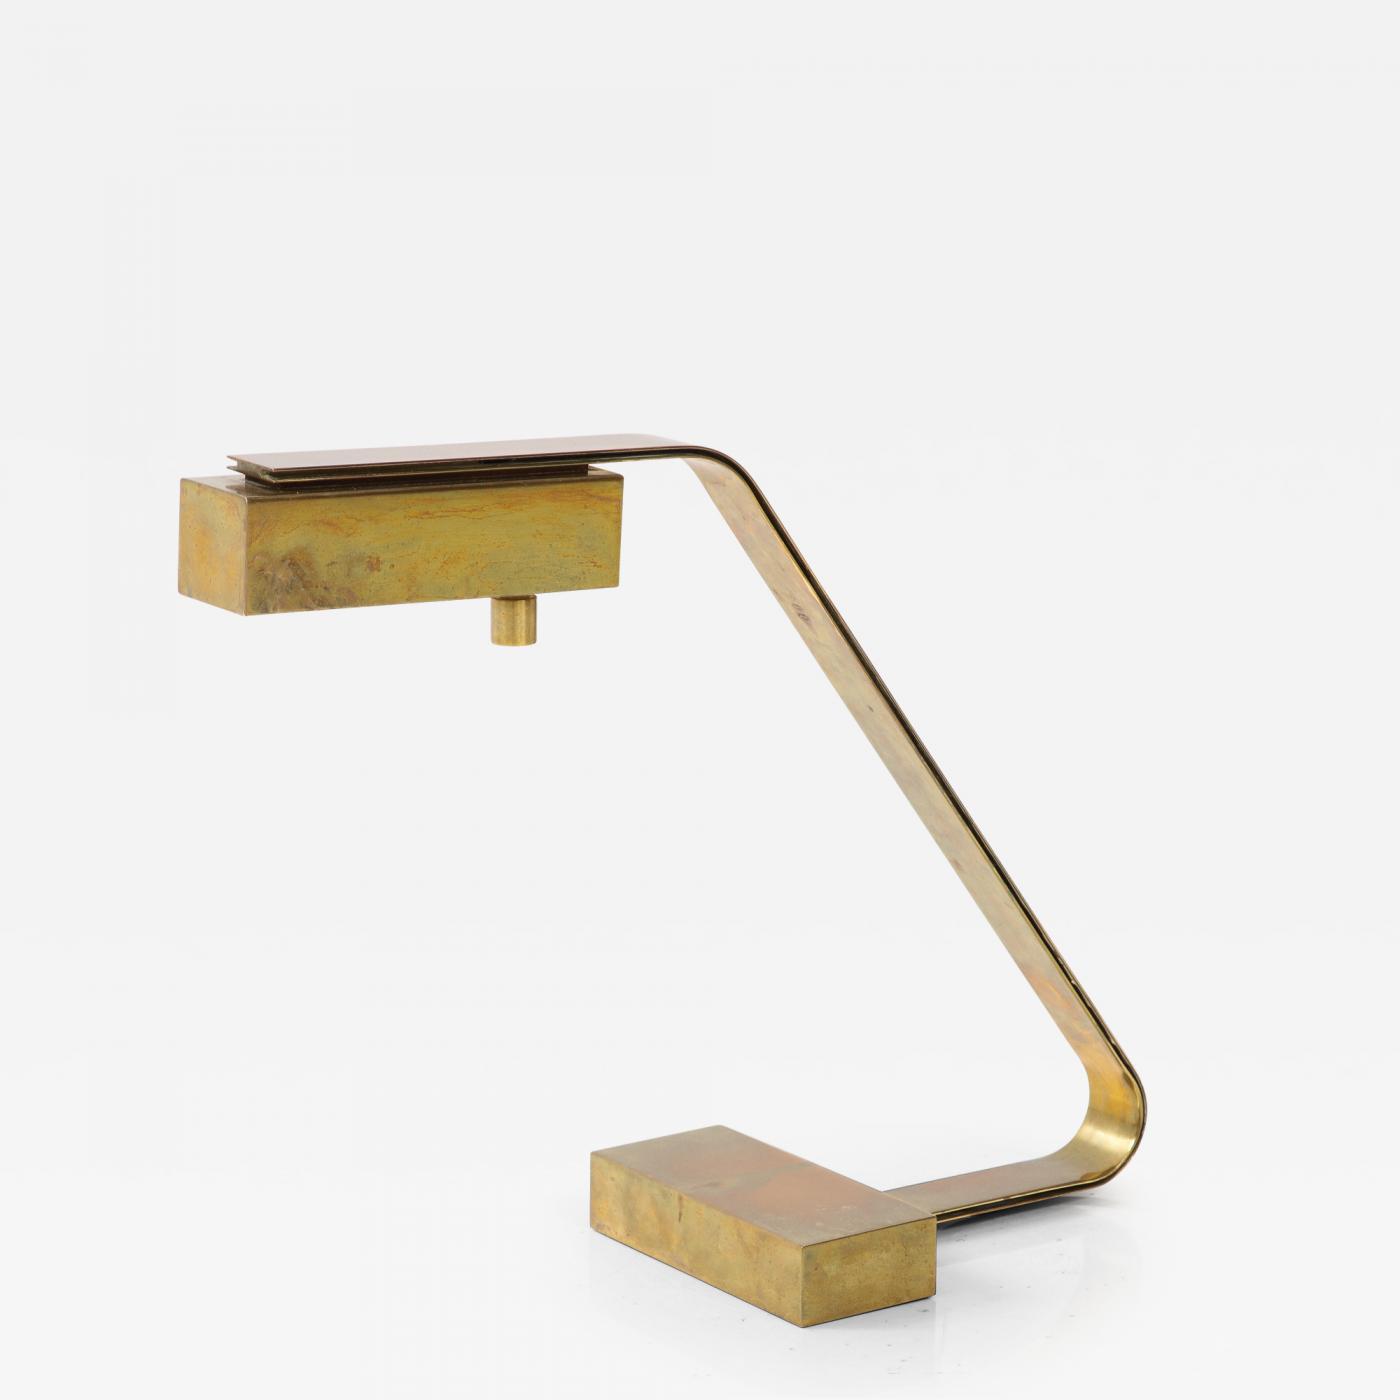 https://cdn.incollect.com/sites/default/files/zoom/Brass-Flat-Bar-Cantilevered-Table-Lamp-by-Casella-598631-2828759.jpg